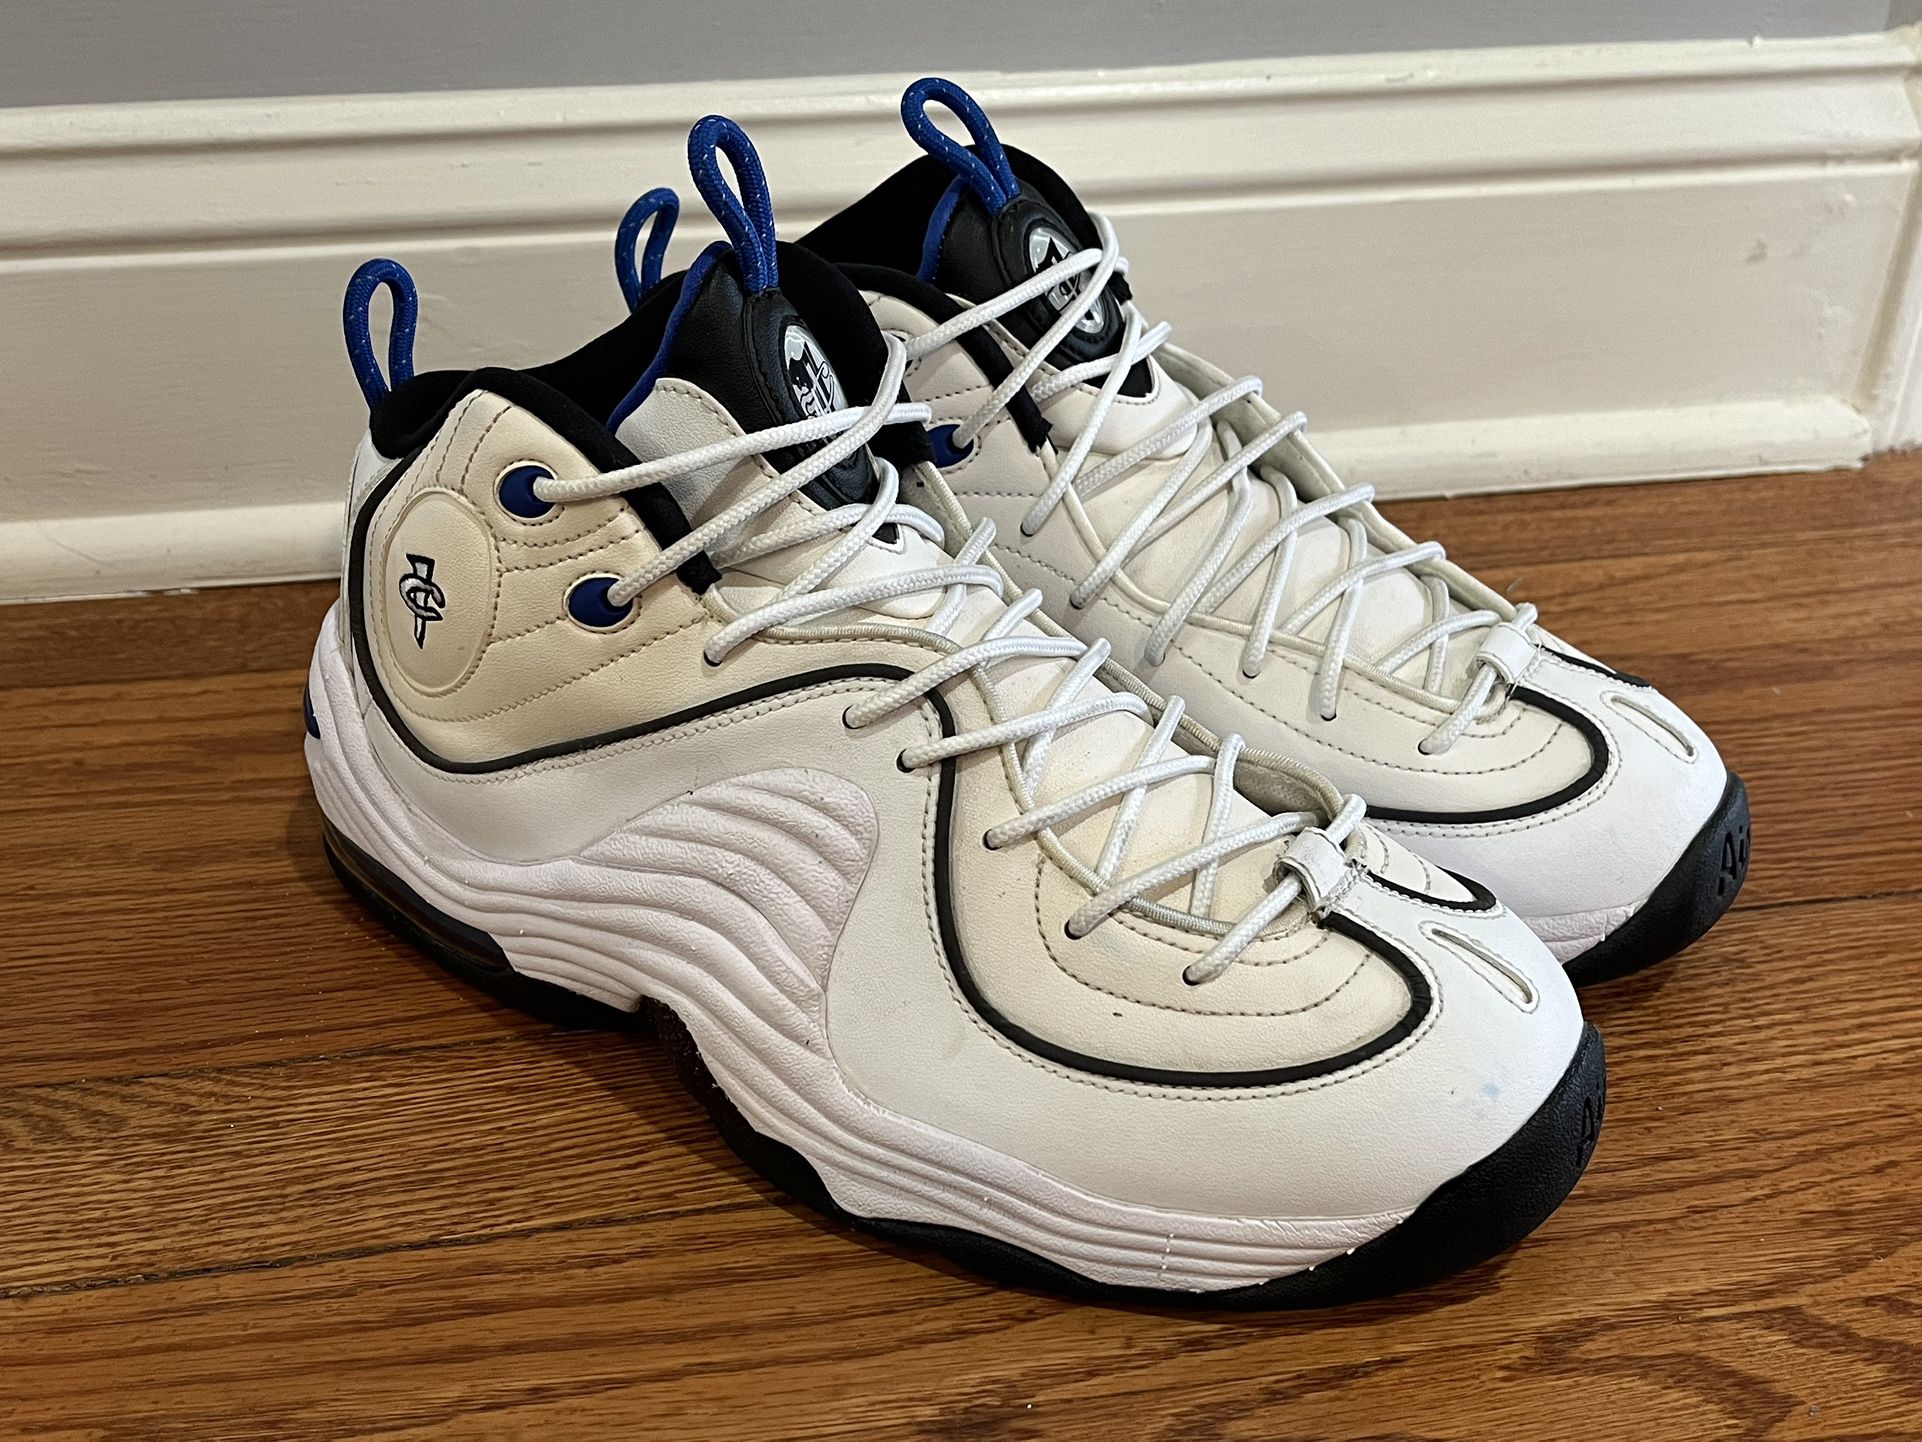 Nike Air Penny 2 Home Size 10 Authentic Brand New Never Worn